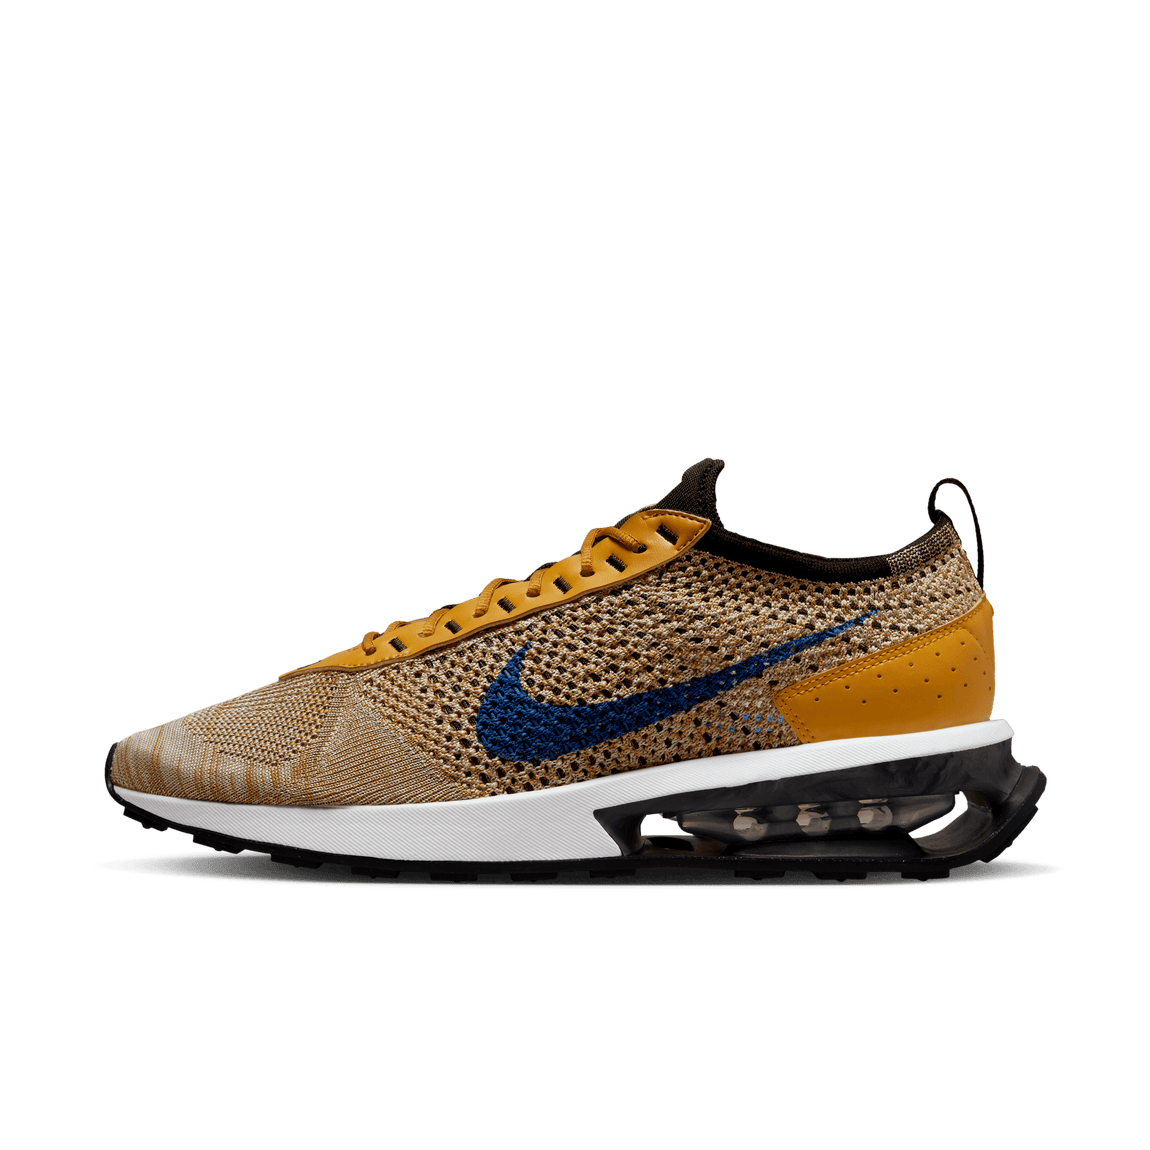 Nike Air Max Flyknit Racer Next Nature (Elemental Gold/Hyper Royal-Gold Suede) - Nike Air Max Flyknit Racer Next Nature (Elemental Gold/Hyper Royal-Gold Suede) - 